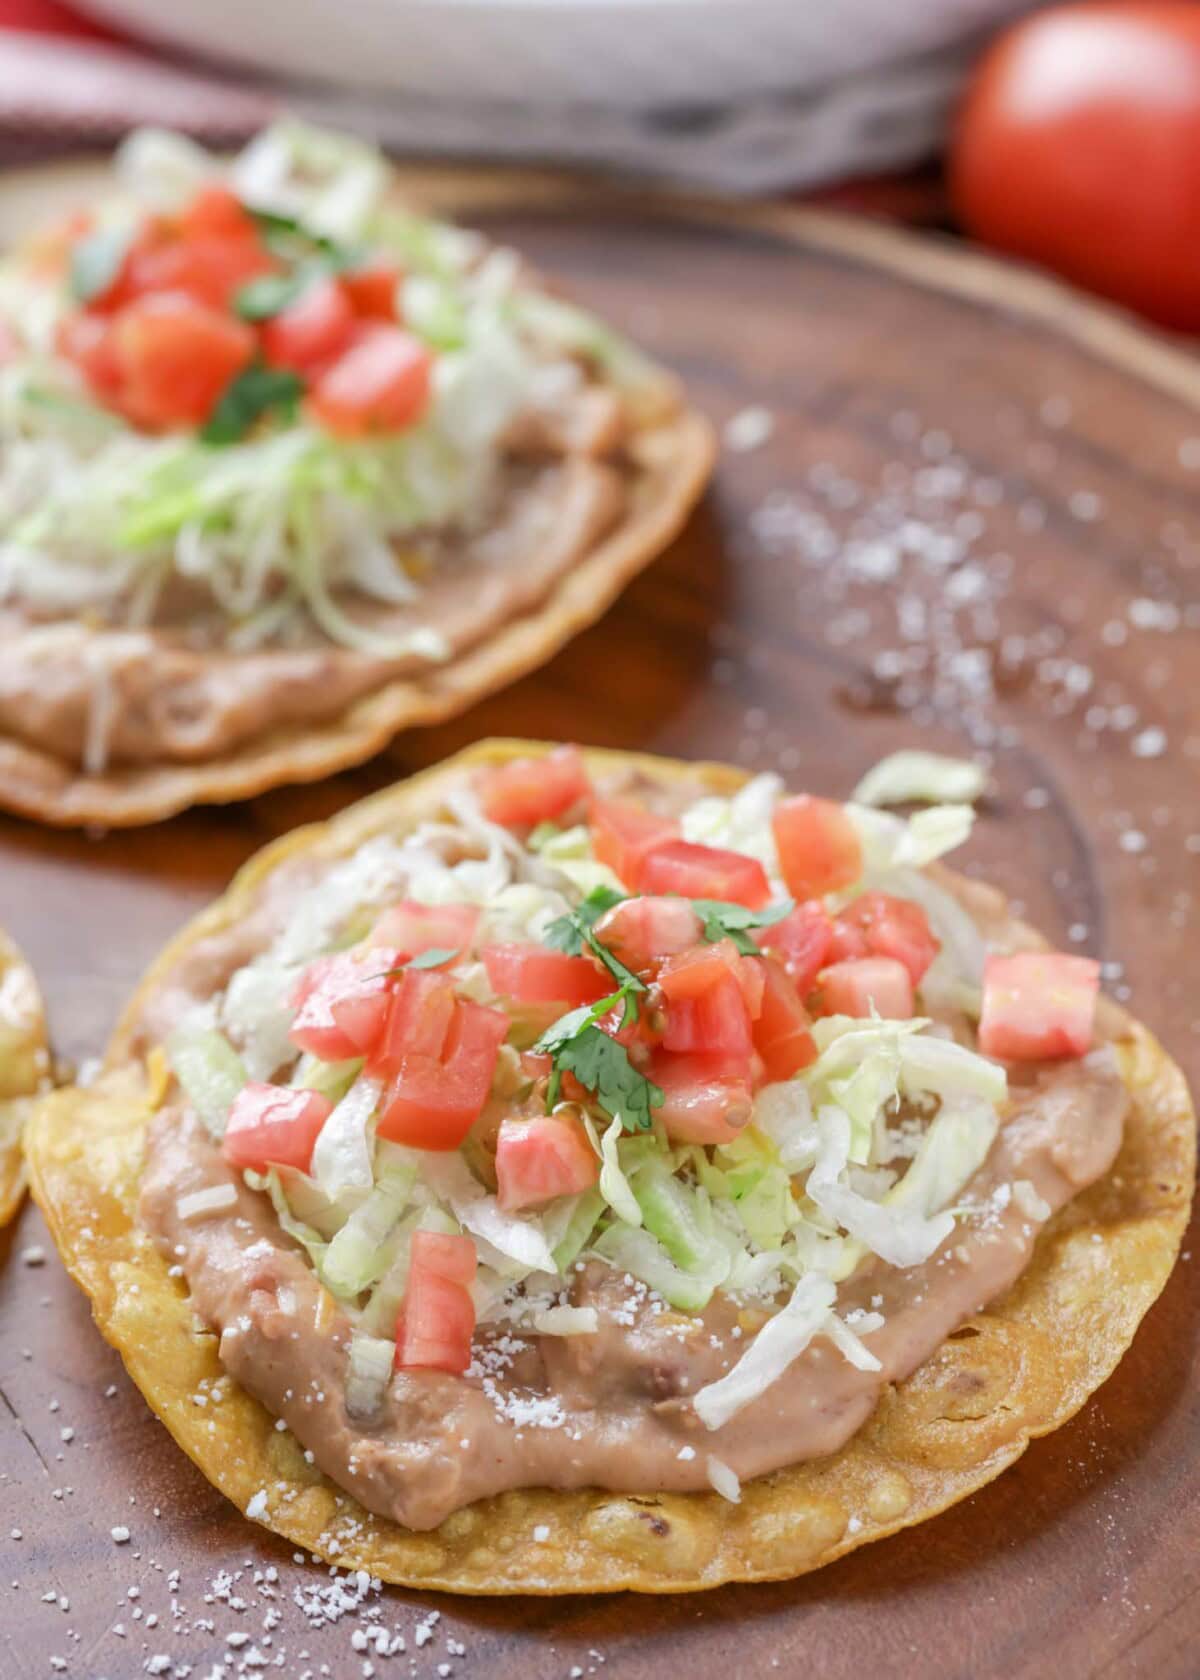 Easy tostada recipe with beans, lettuce, tomatoes and more on top.